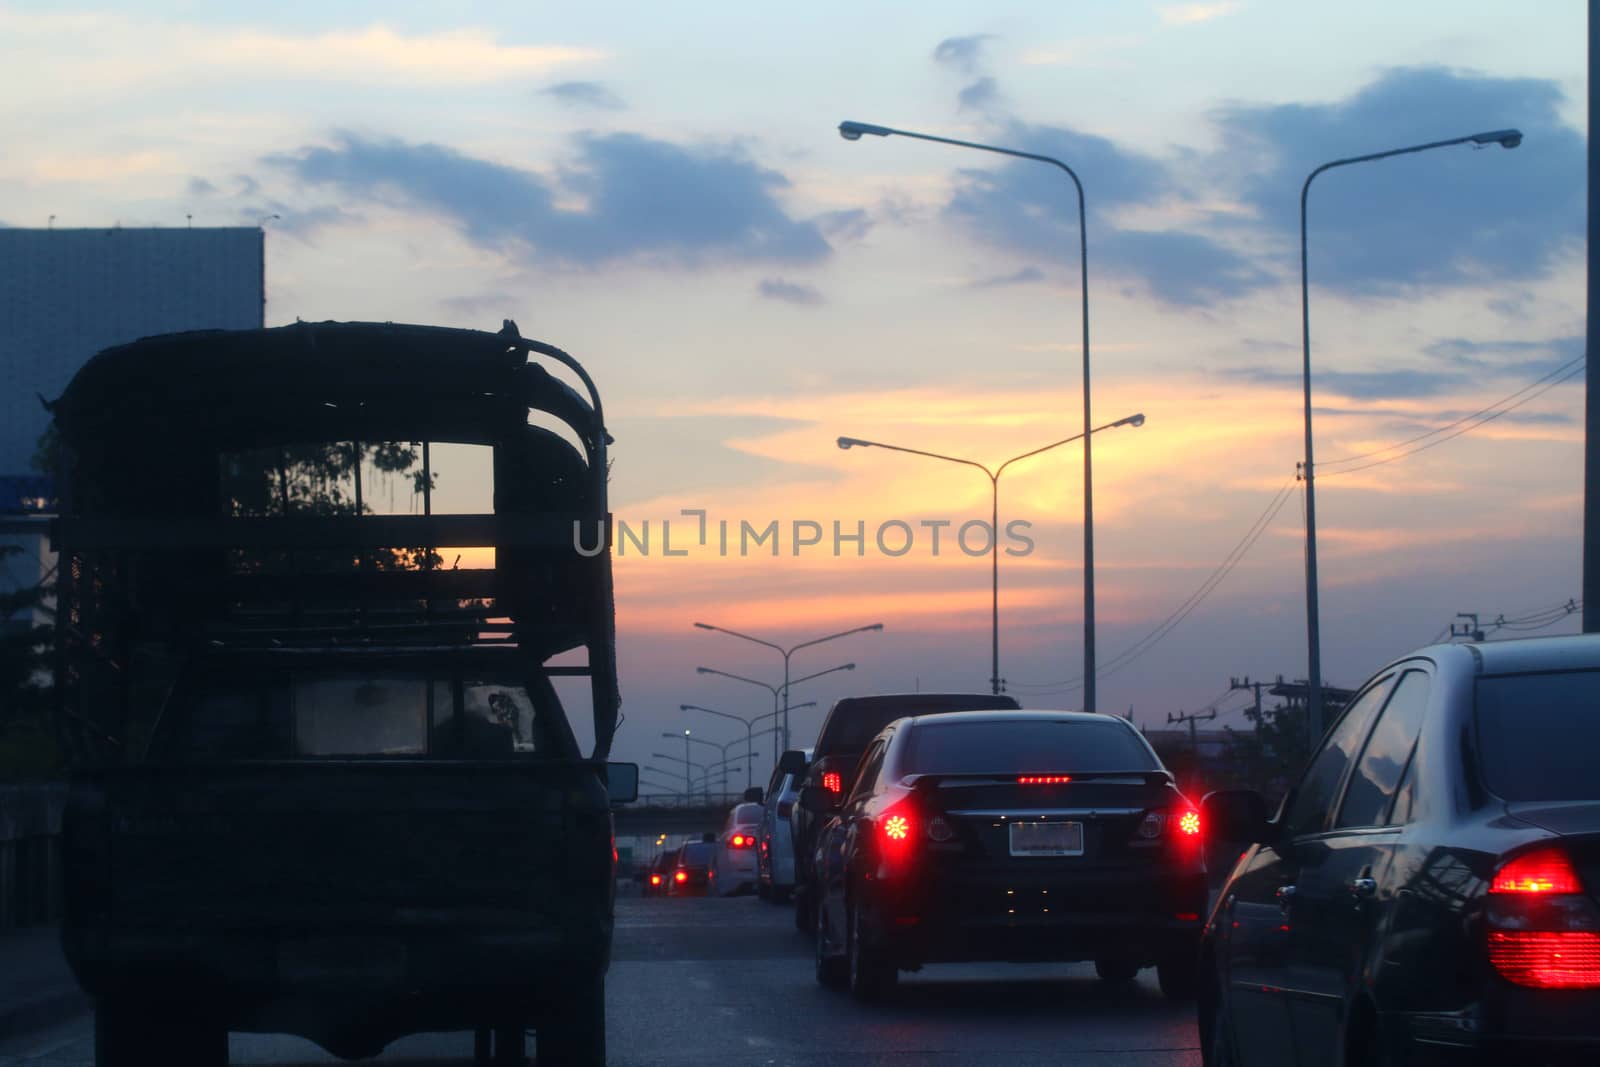 Traffic jam in Bangkok evening Pollution, Traffic and land transport by car, Truck transport by road by cgdeaw